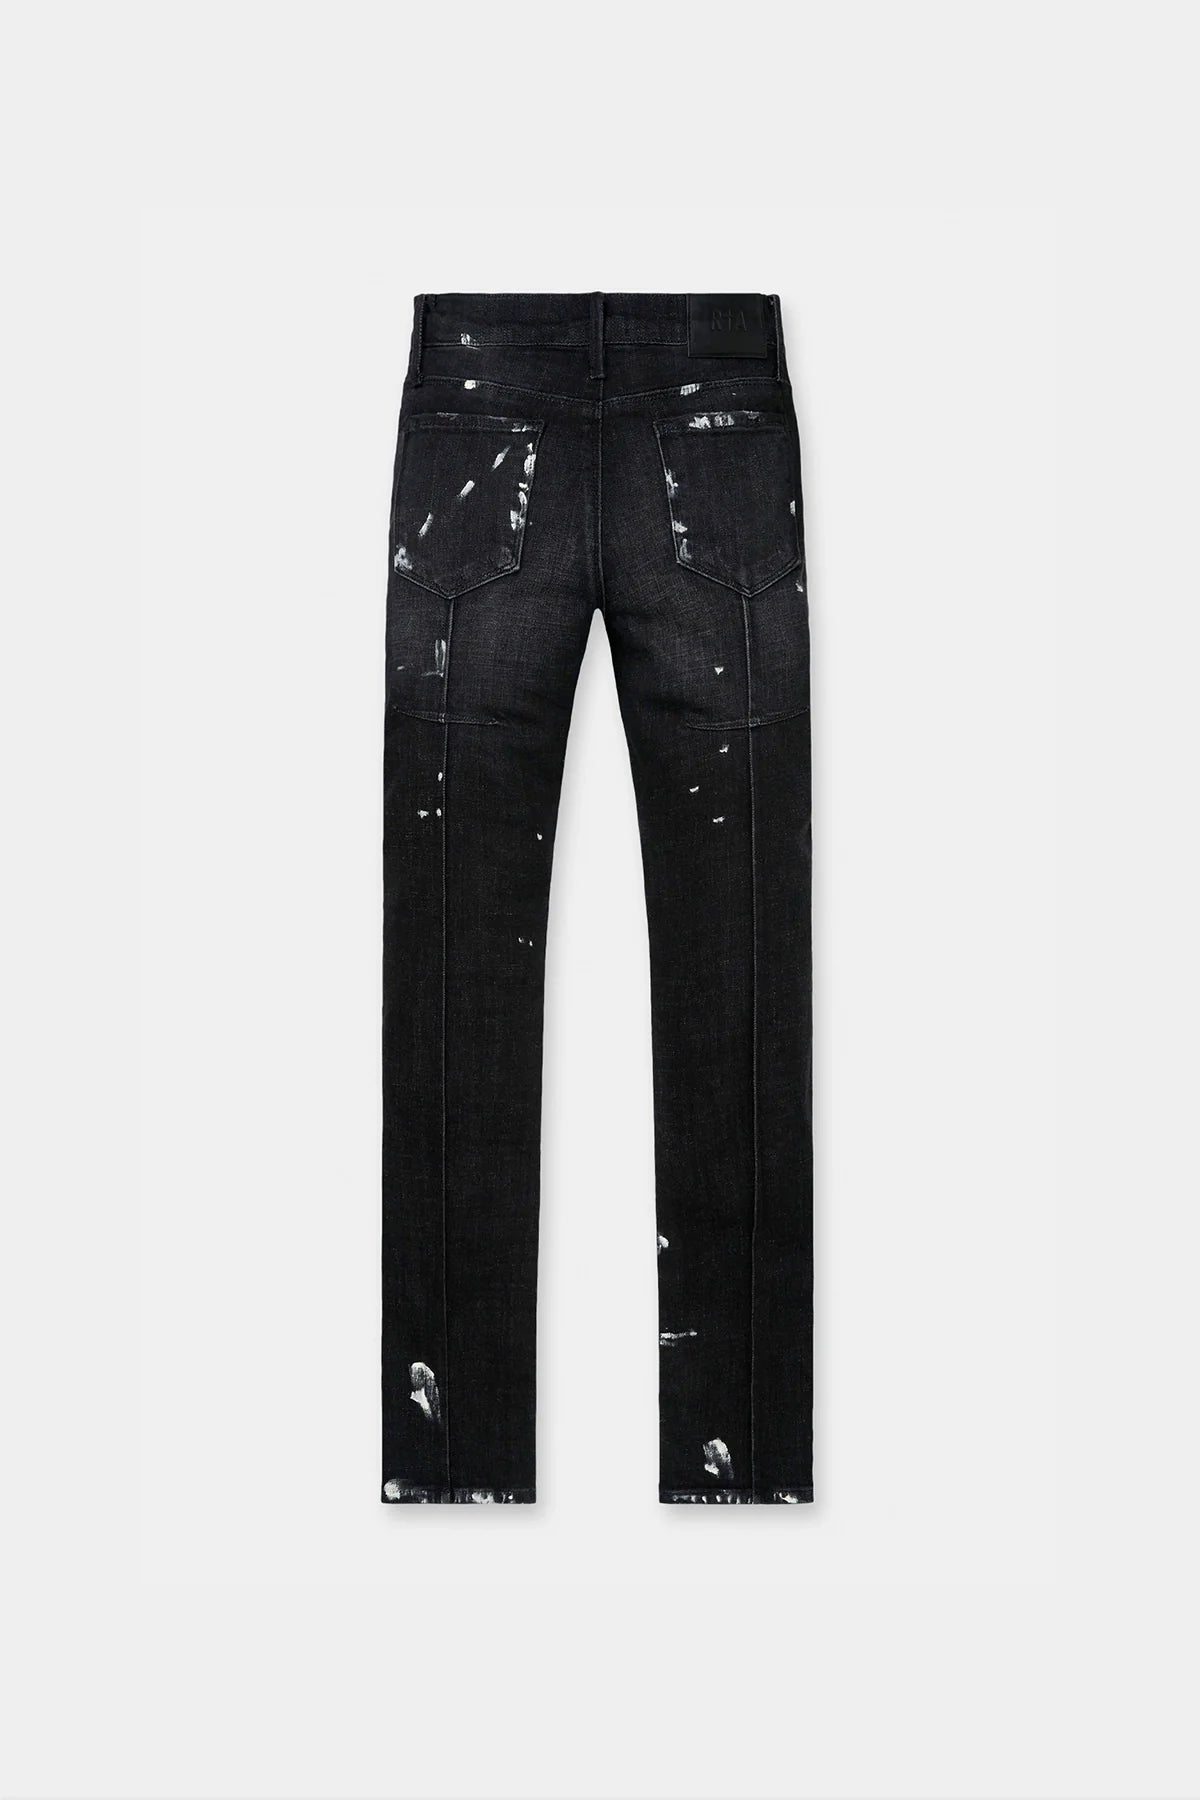 RTA DISTRESSED CHARCOAL PAINT JEANS